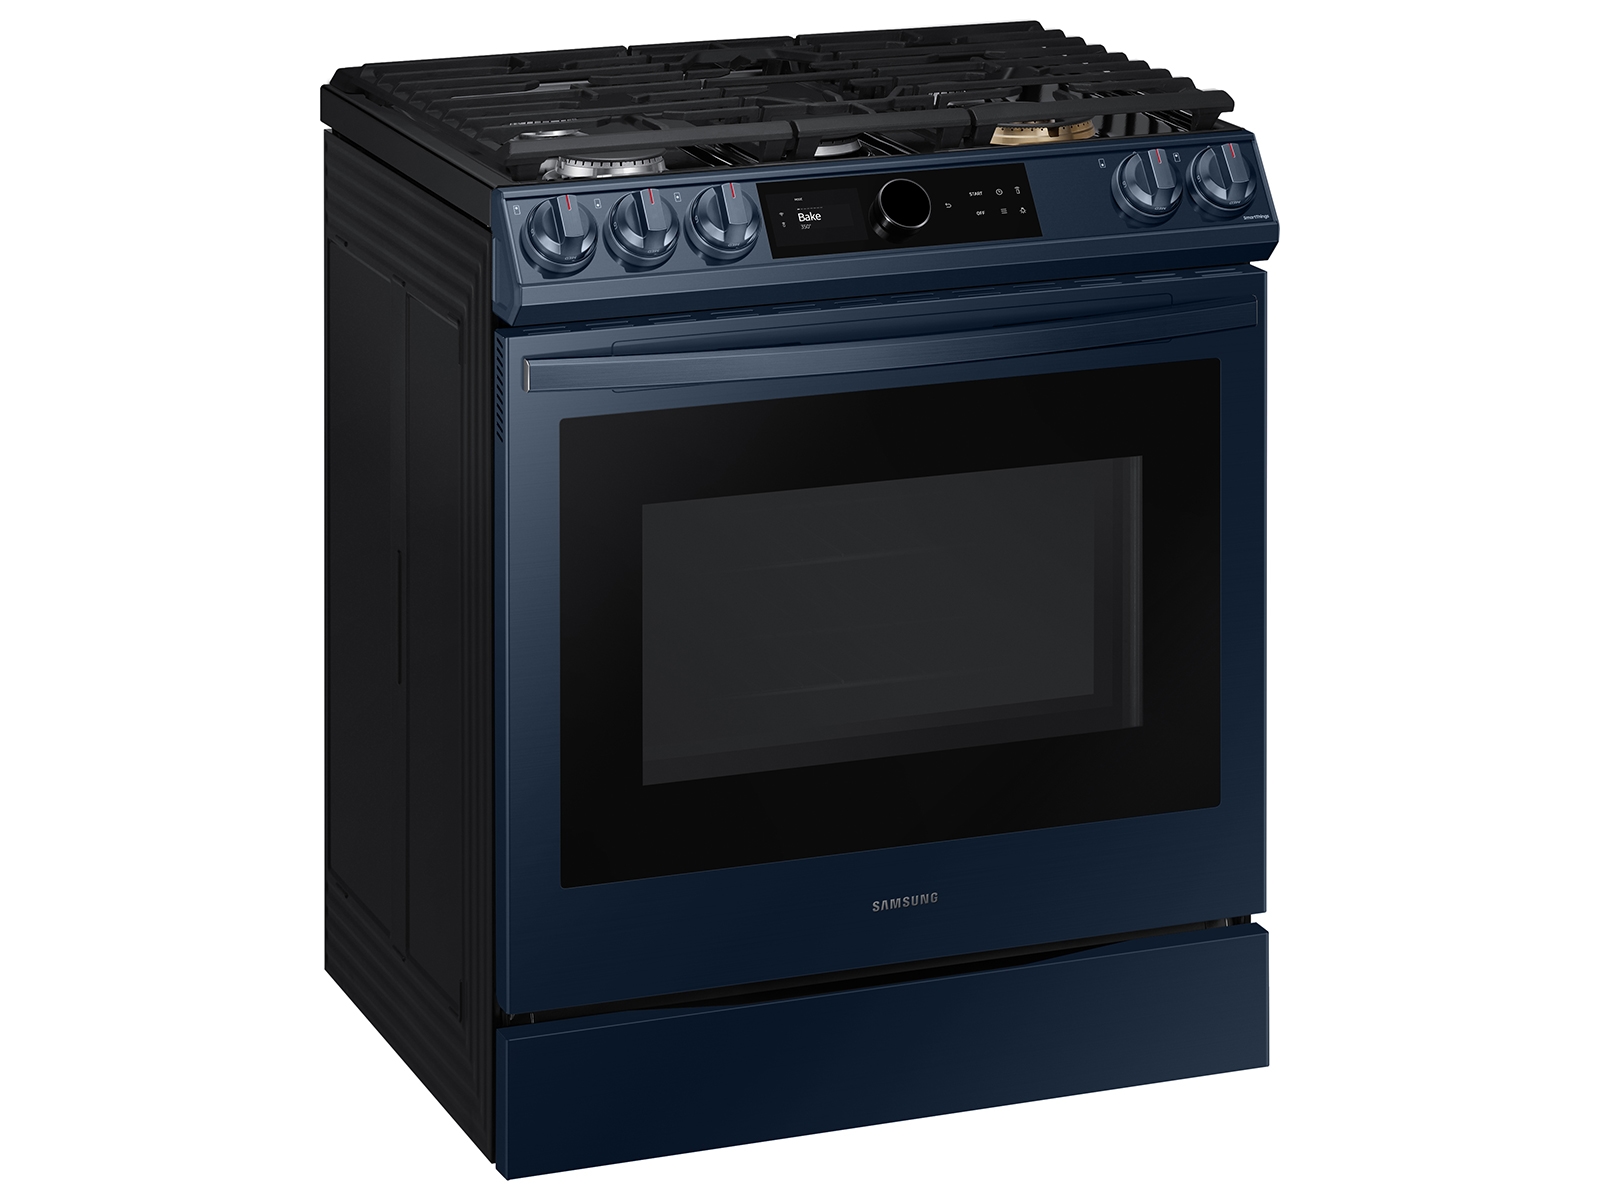 Specialty Appliance Inc. - Our new Blue Star kitchen showroom